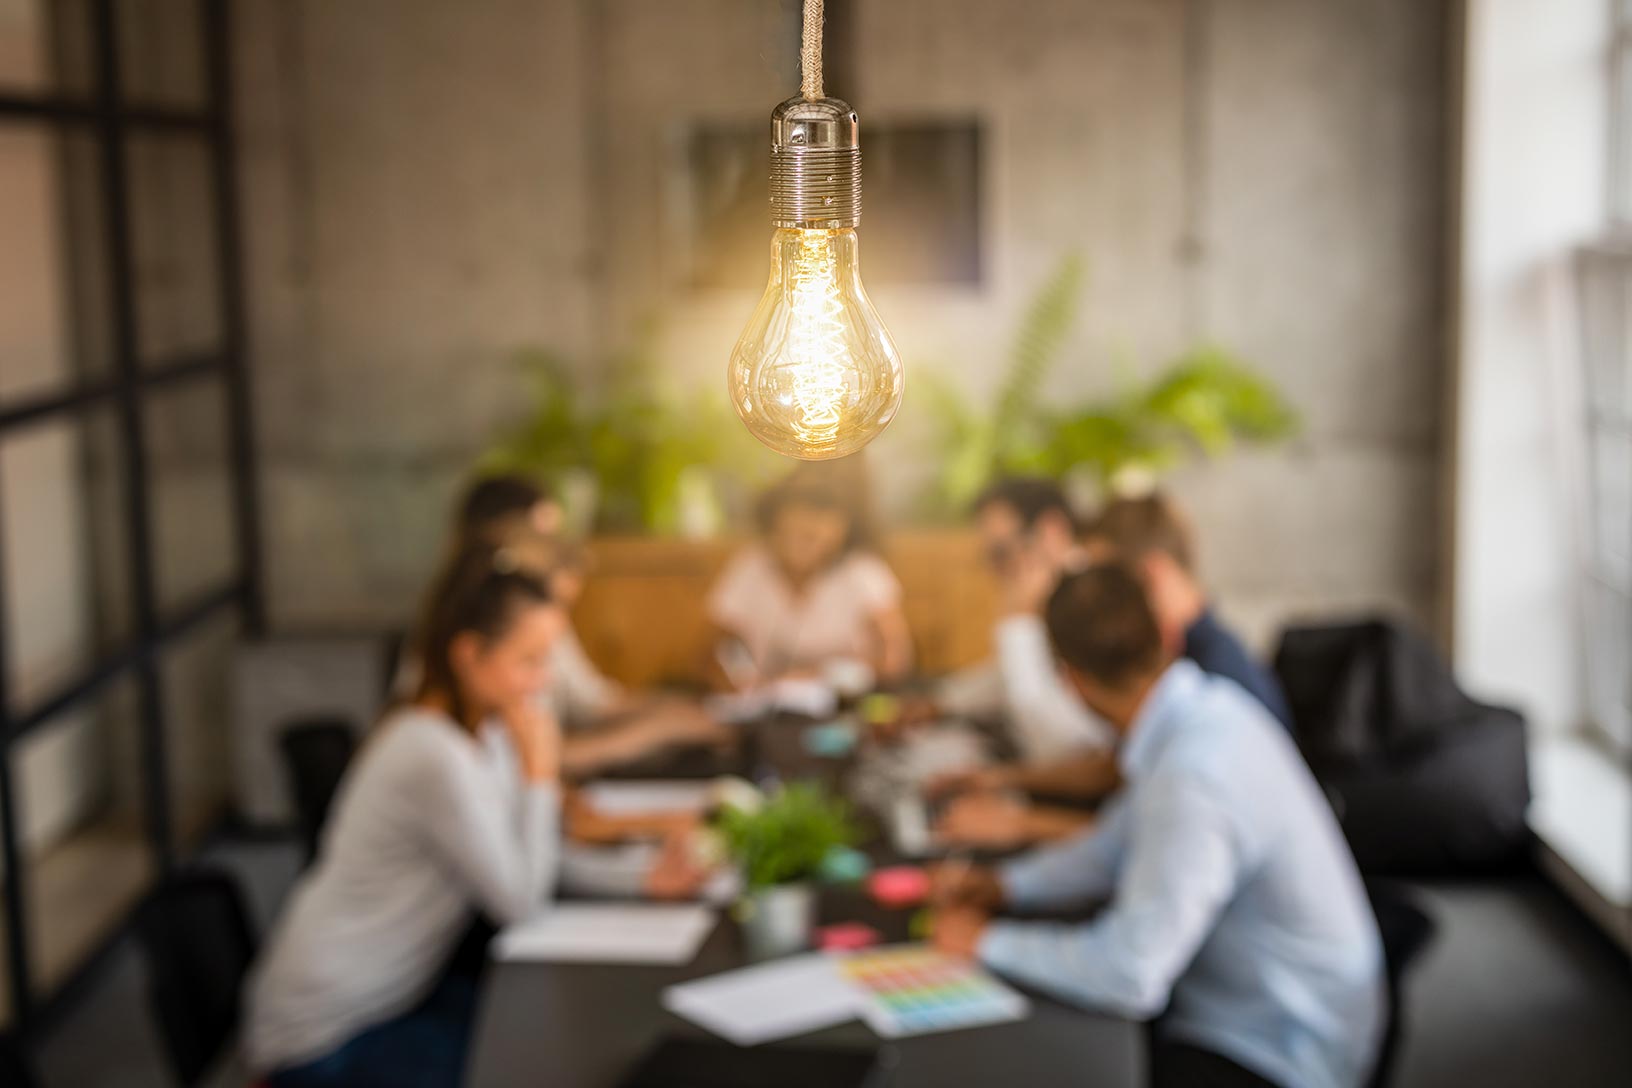 People sitting at a table collaborating with a light bulb hanging above them